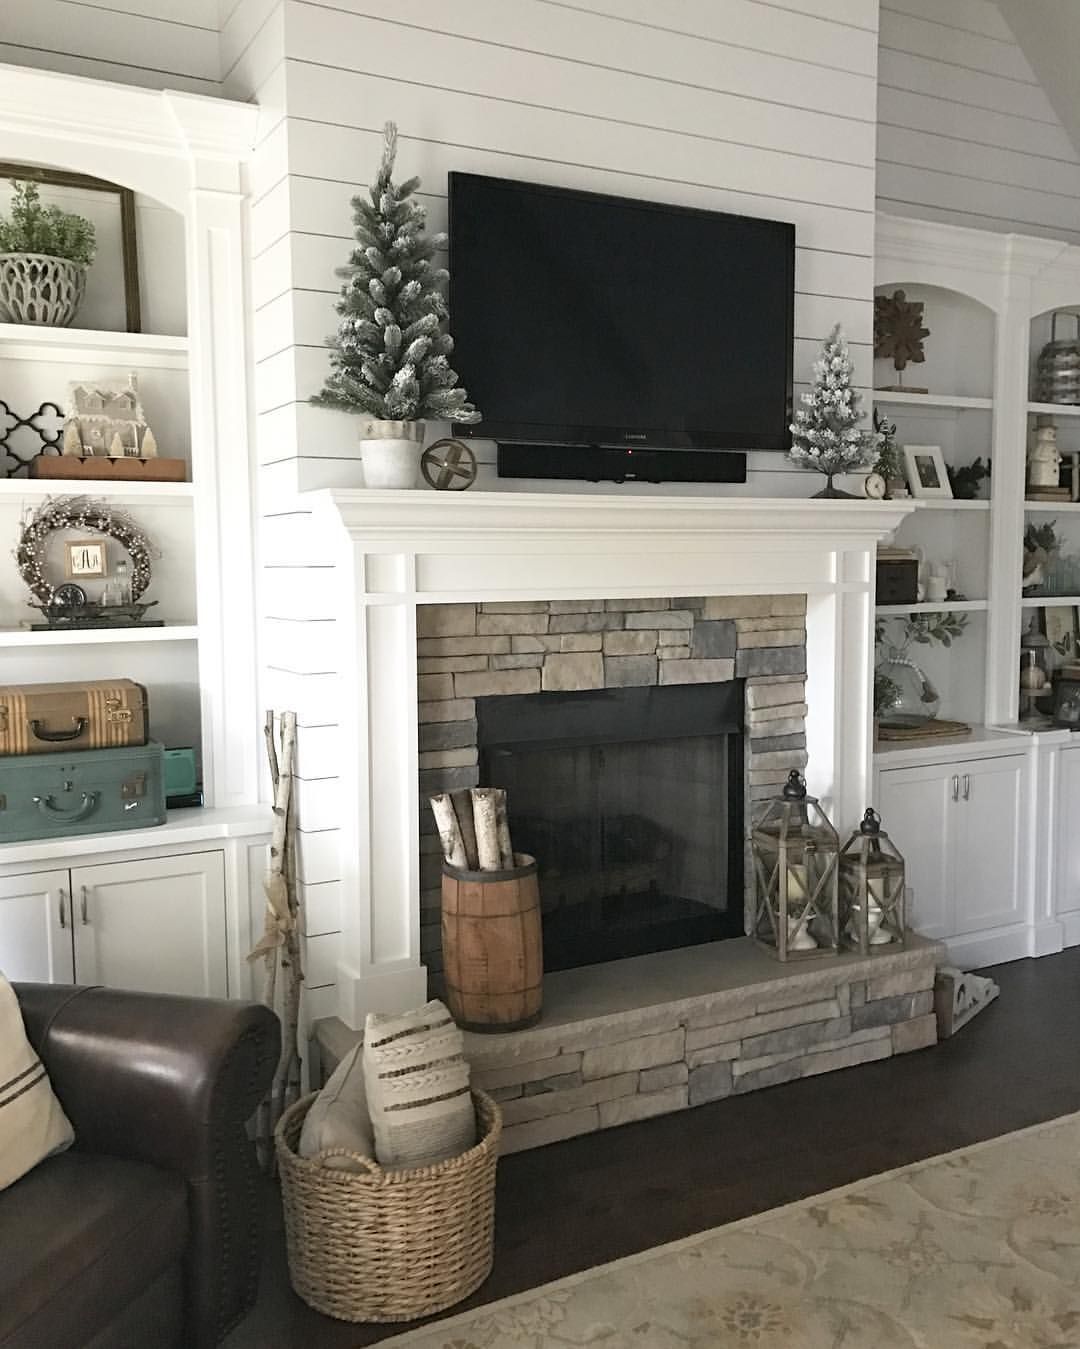 farmhouse decor living room joanna gaines mantles unique pin by sarah hora on decor 2 in 2019 pinterest of farmhouse decor living room joanna gaines mantles